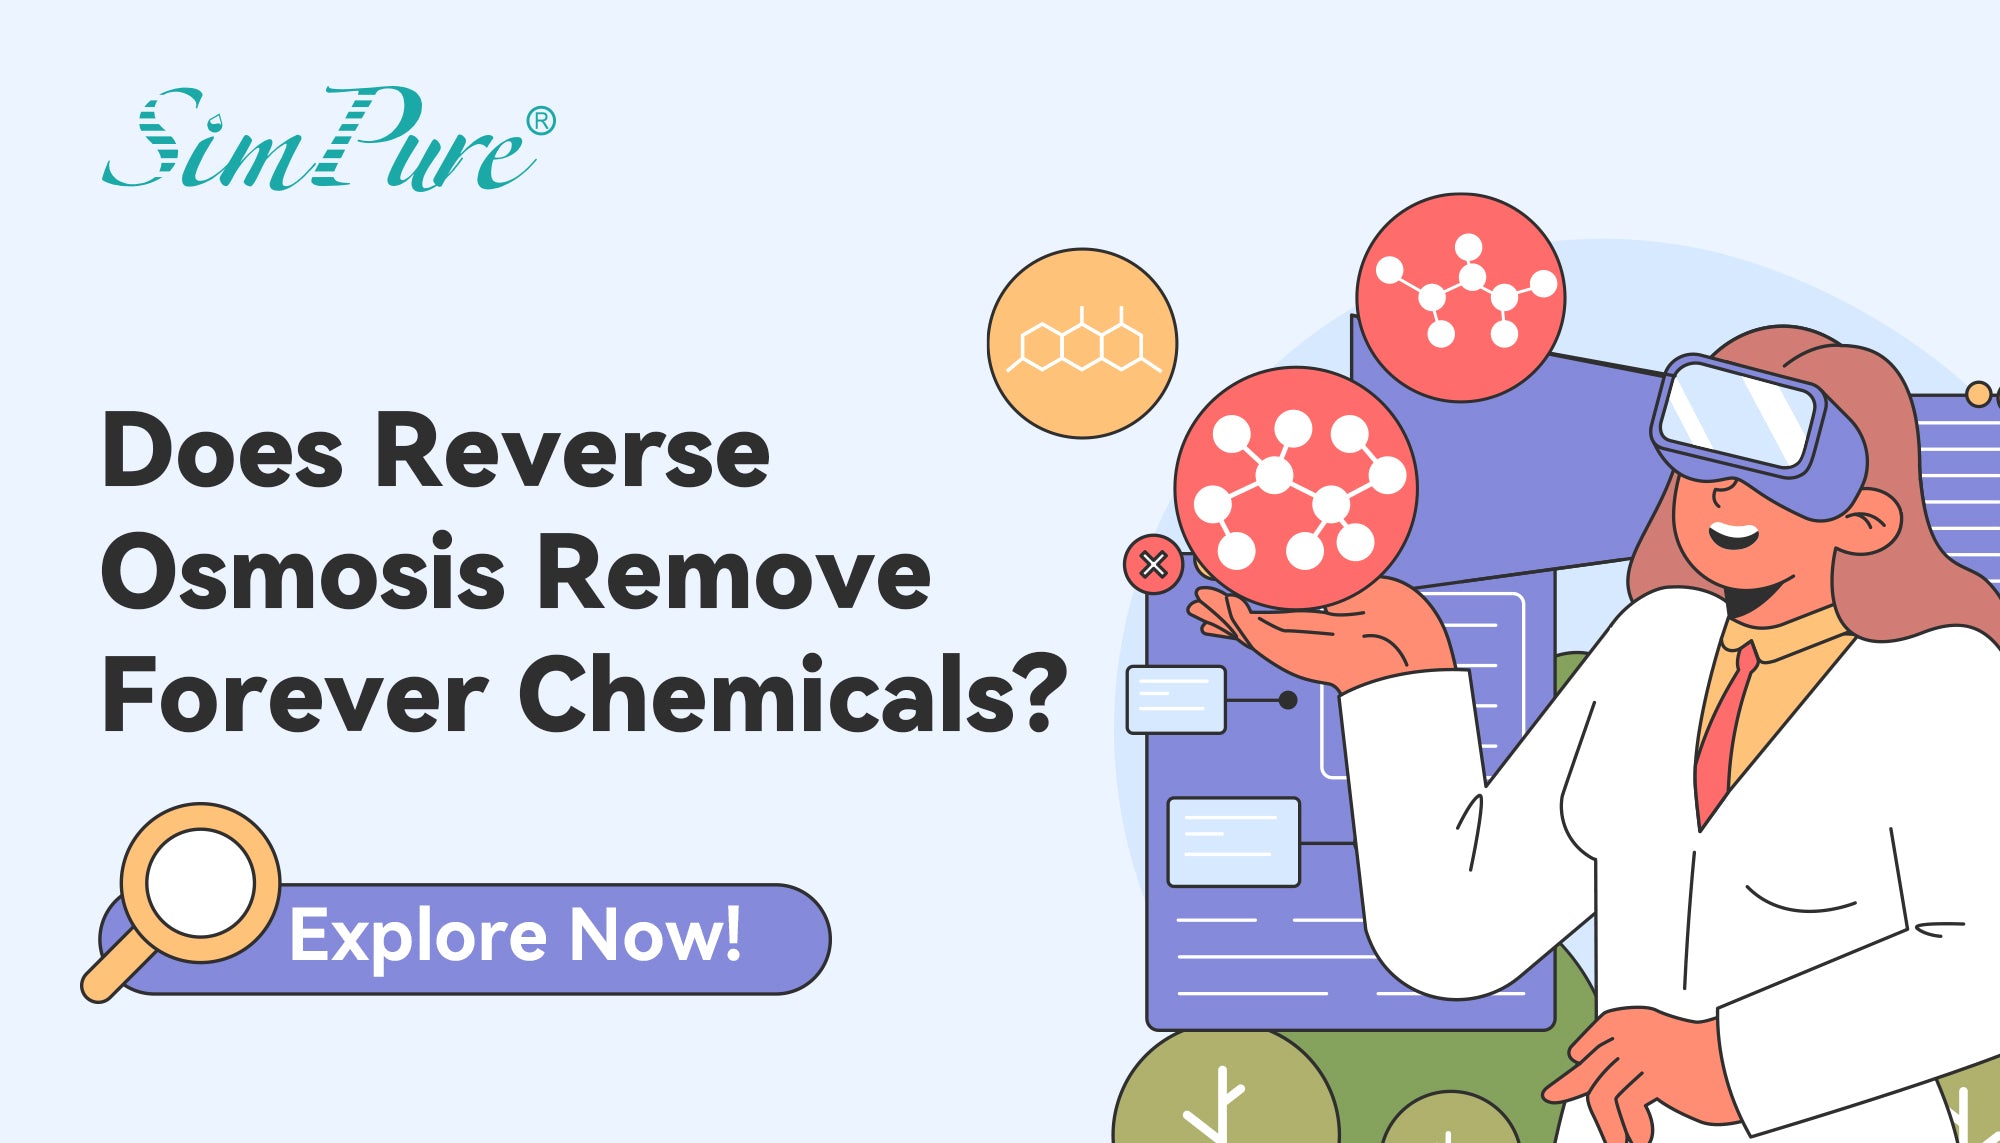 Can forever chemicals last forever?